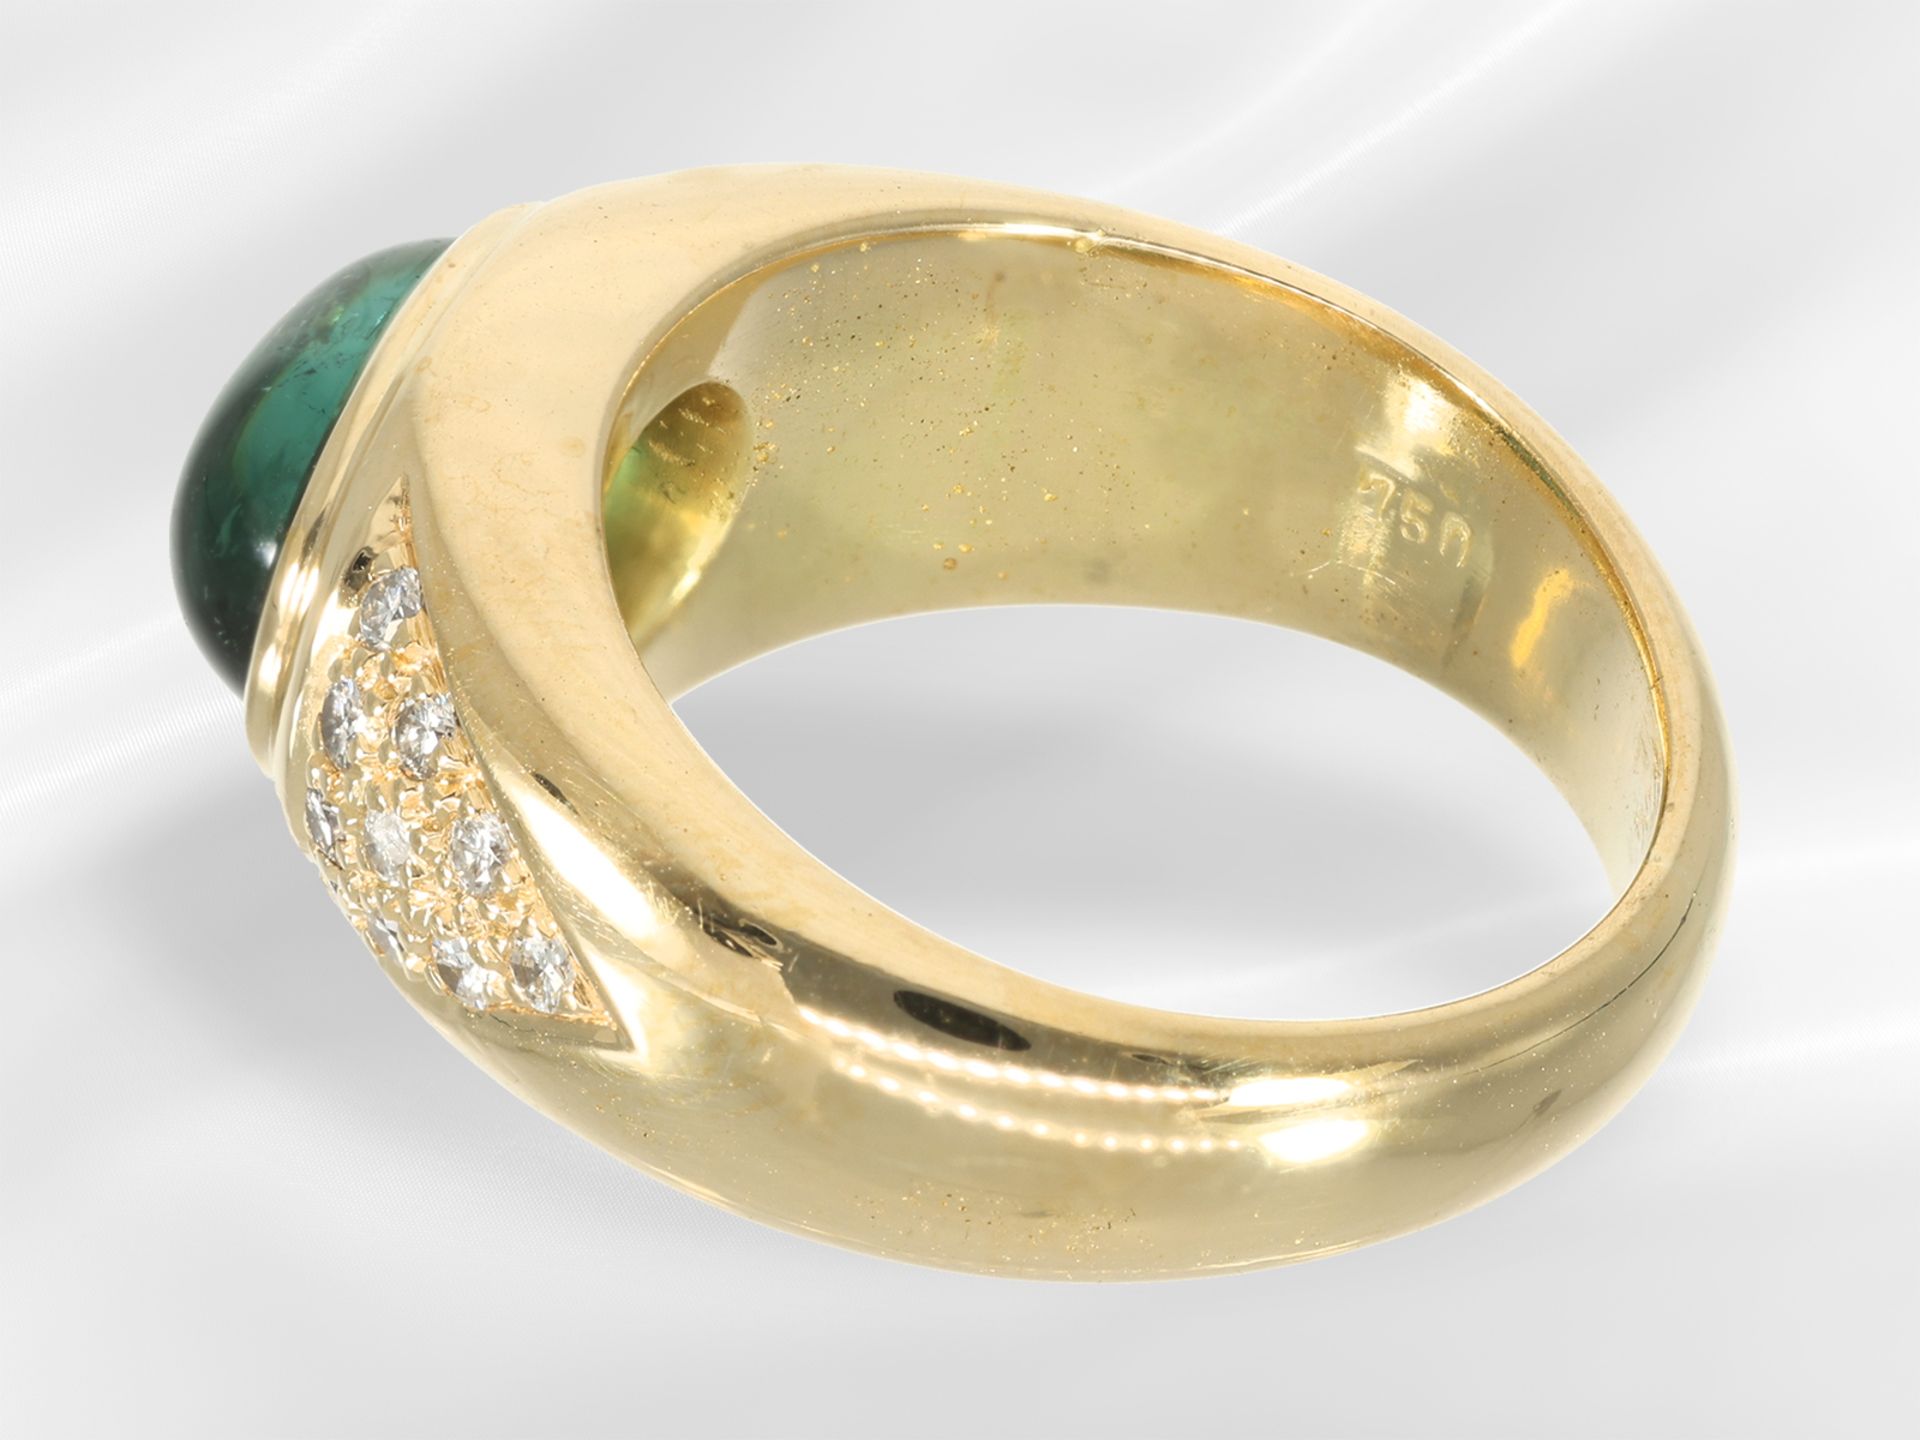 Ring: heavy gold jewellery ring set with brilliant-cut diamonds and tourmaline - Image 5 of 5